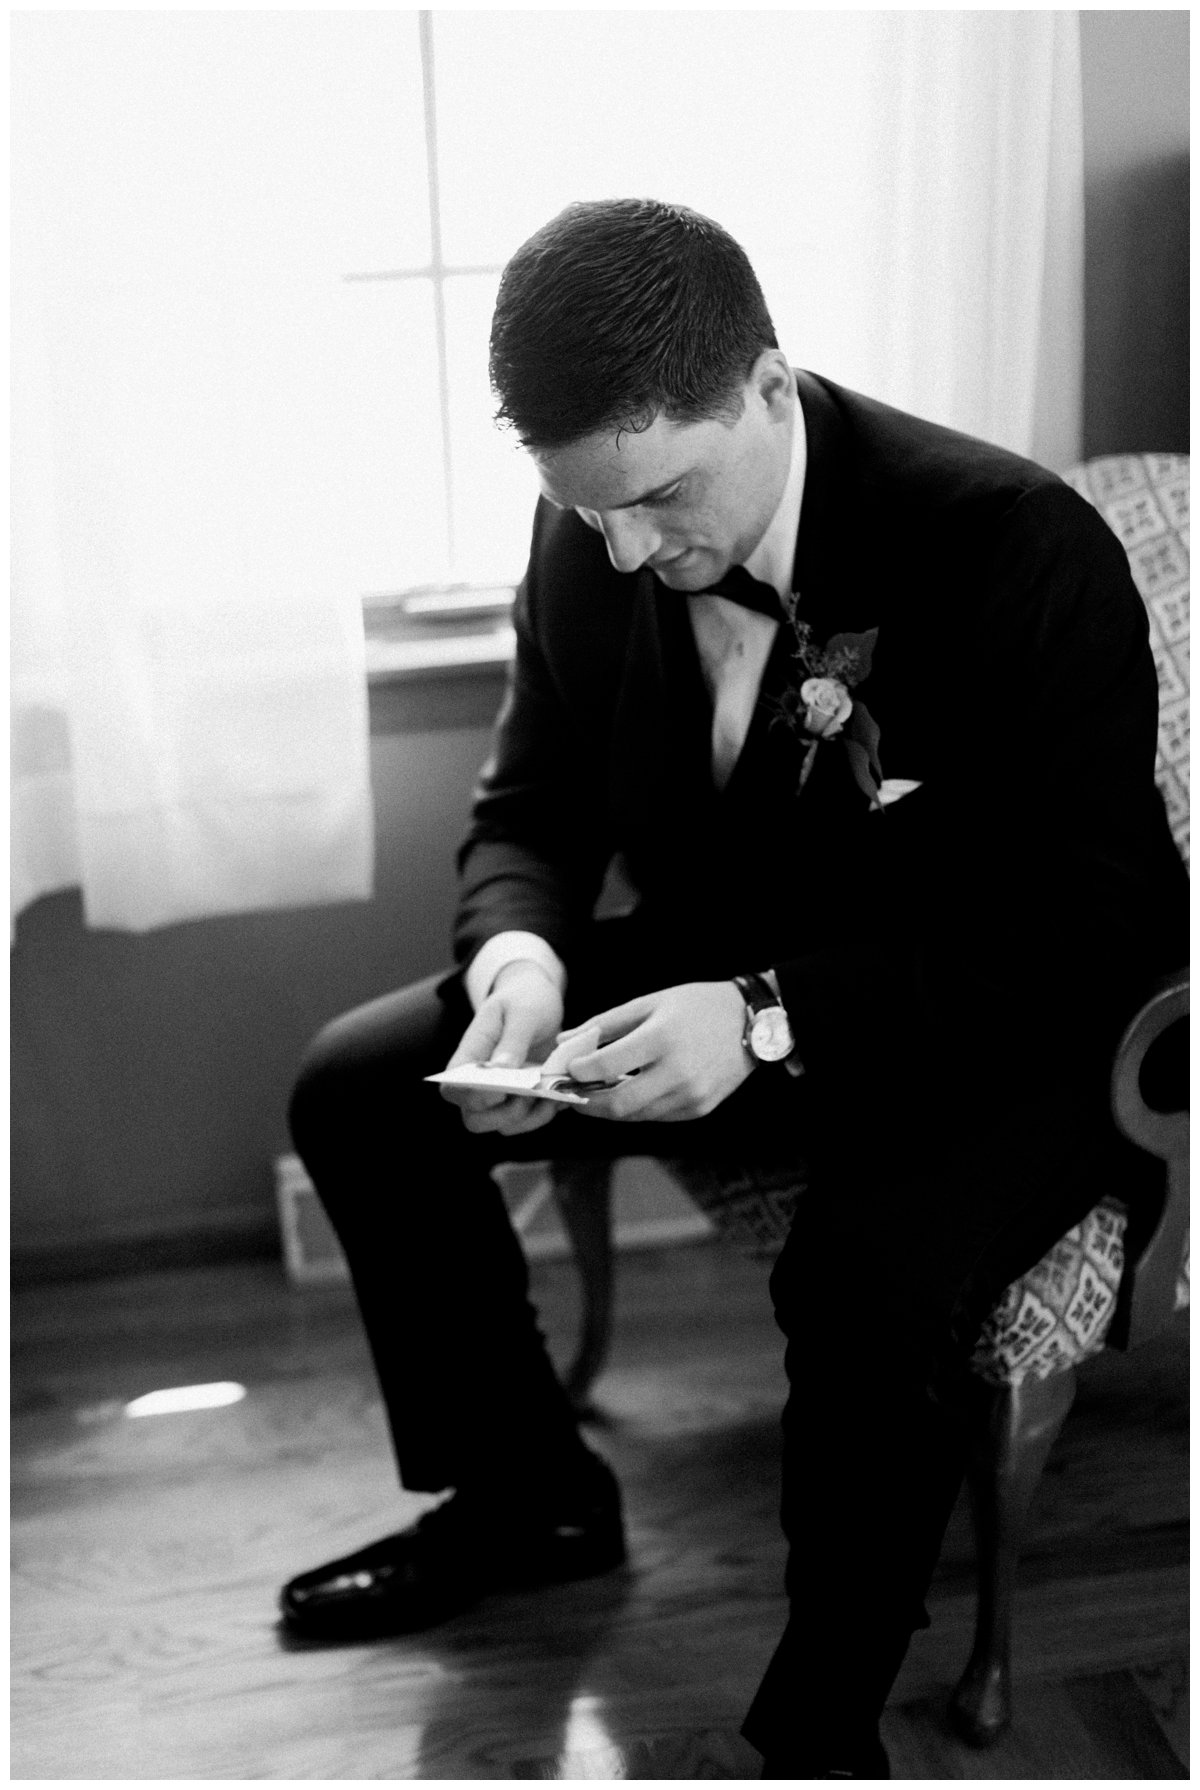 groom contemplating before the wedding